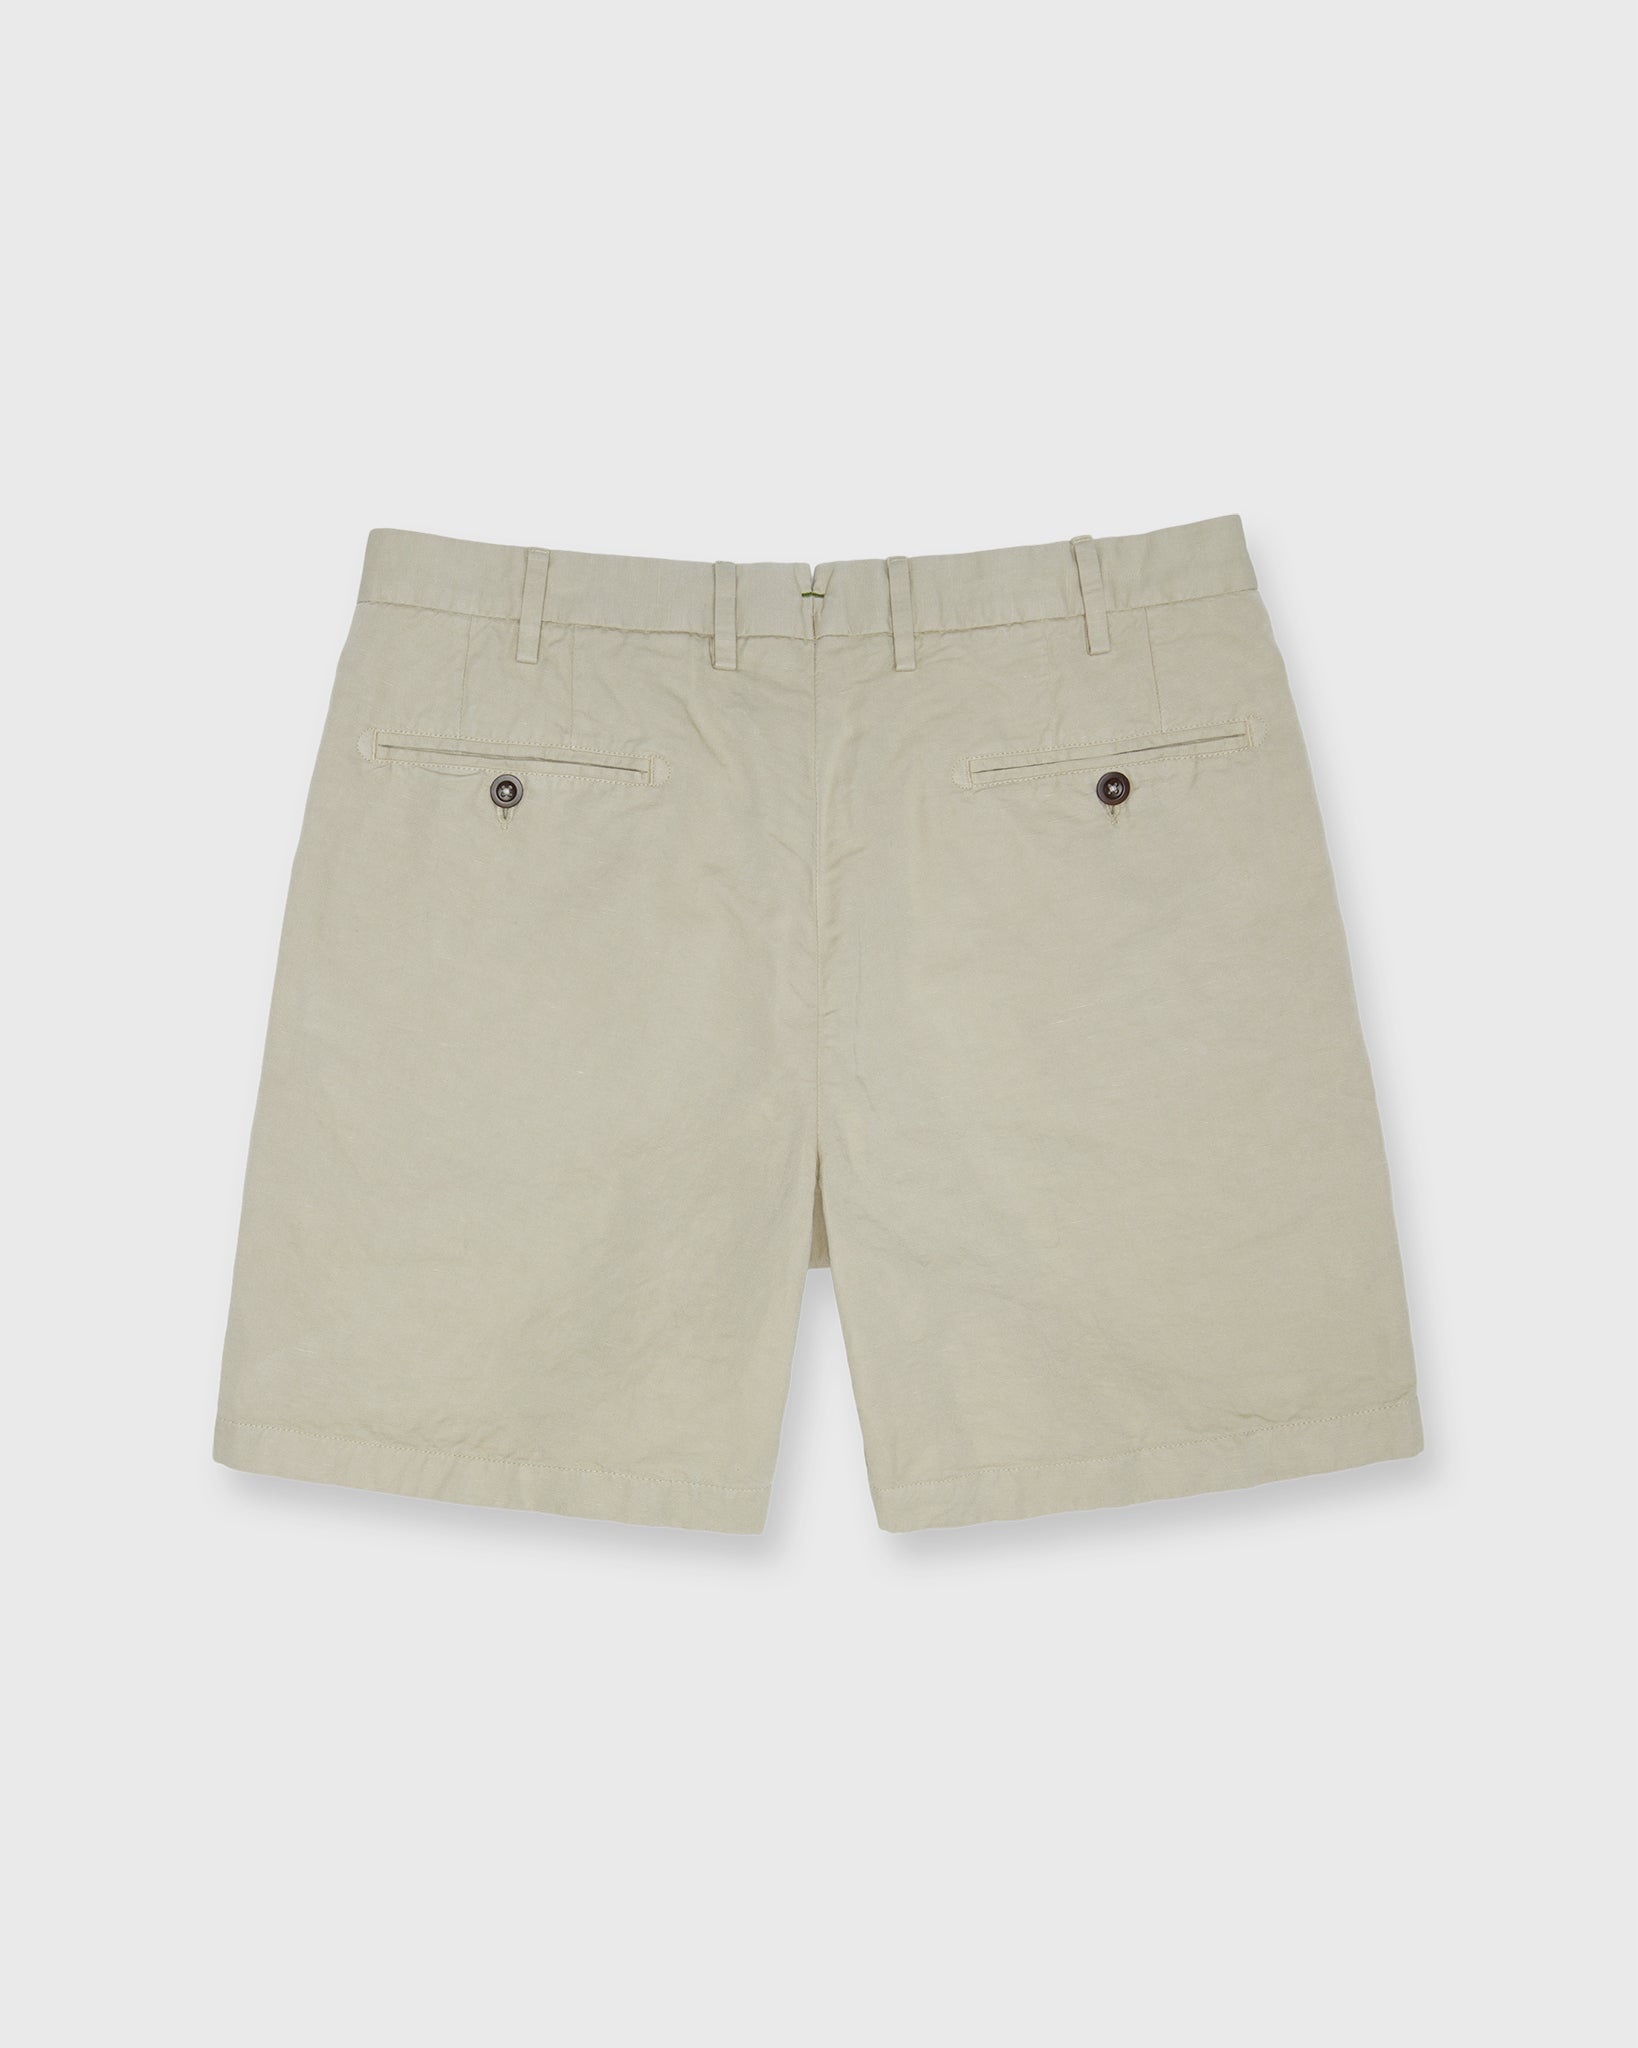 Garment-Dyed Short in Sand Cotolino Twill